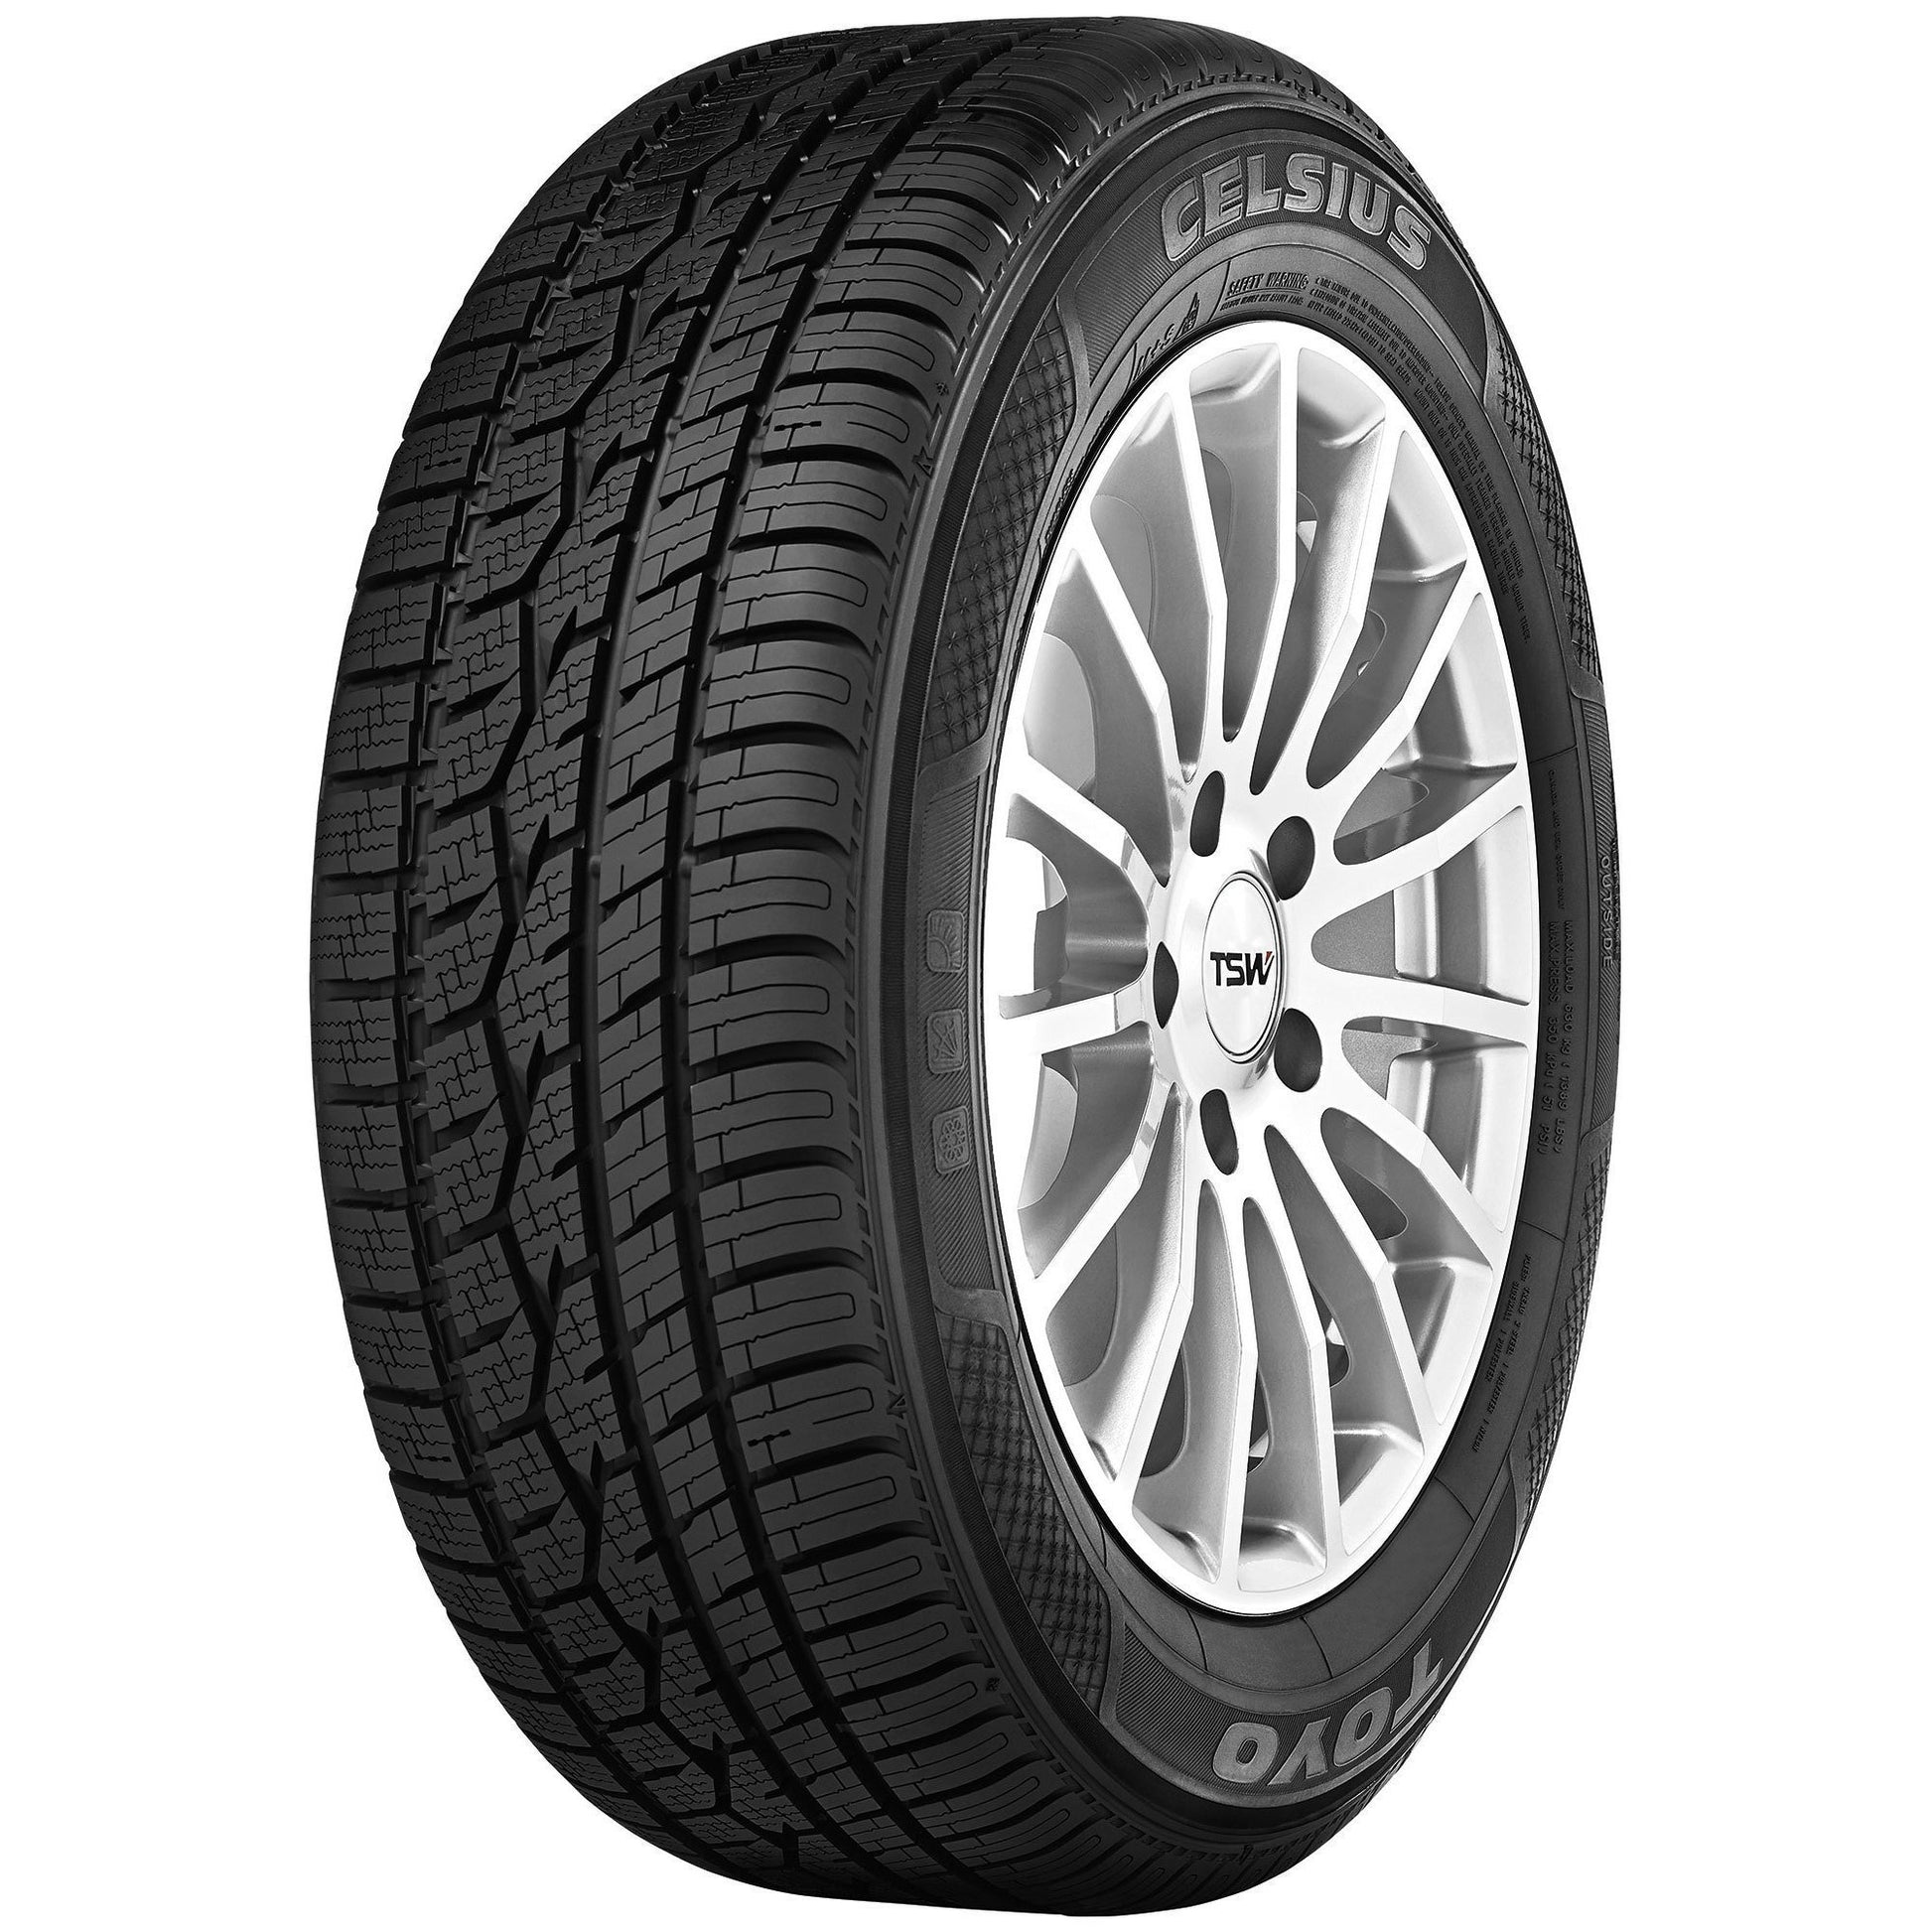 Toyo 205/75R15 97S Celsius Tire - Universal (128330)-toy128330-128330-Tires-Toyo-205-75-15-JDMuscle